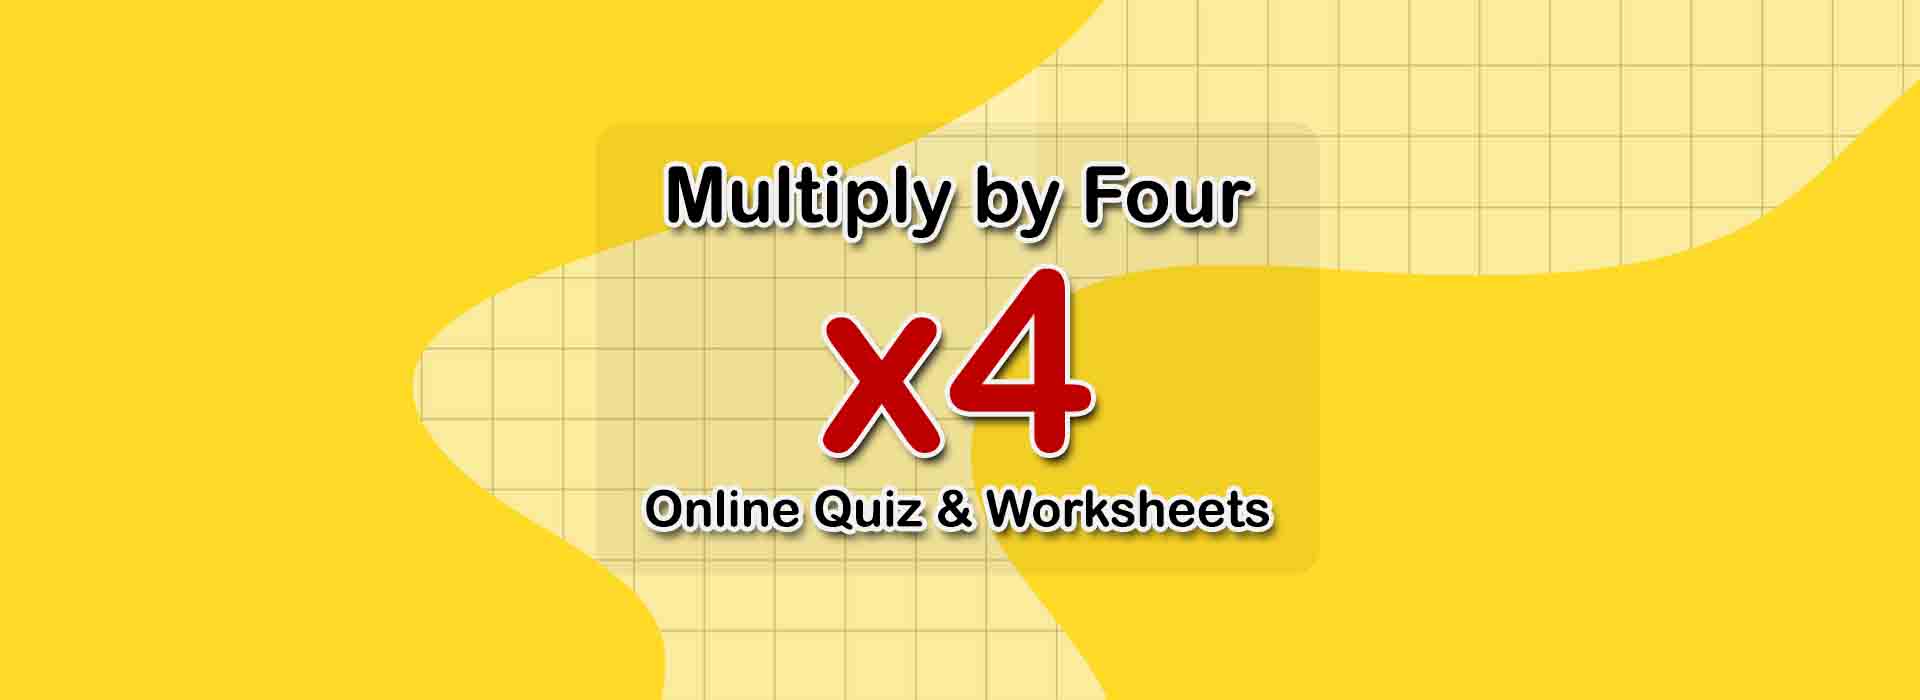 multiplying-1-to-12-by-7-a